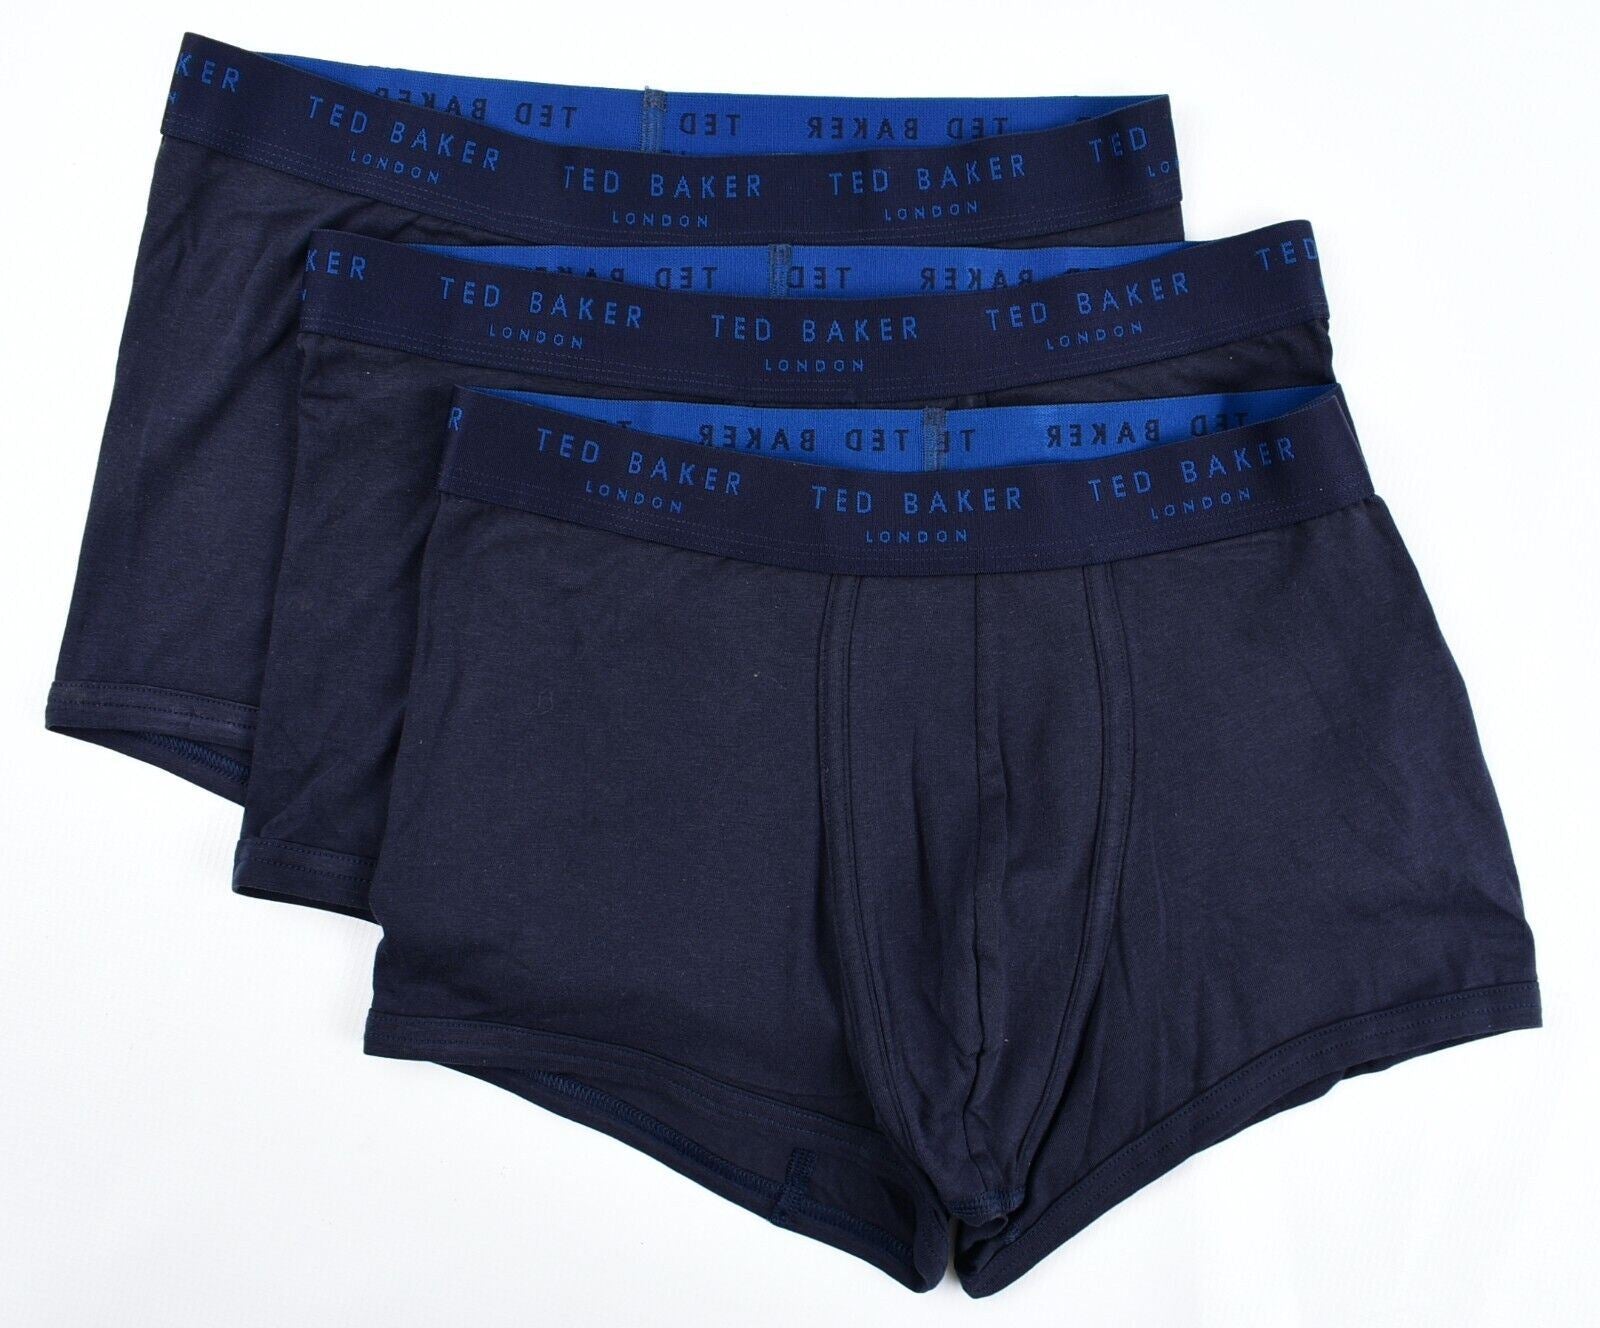 TED BAKER Underwear: Men's 3-Pack Fitted Boxer Trunks, Navy Blue, size S